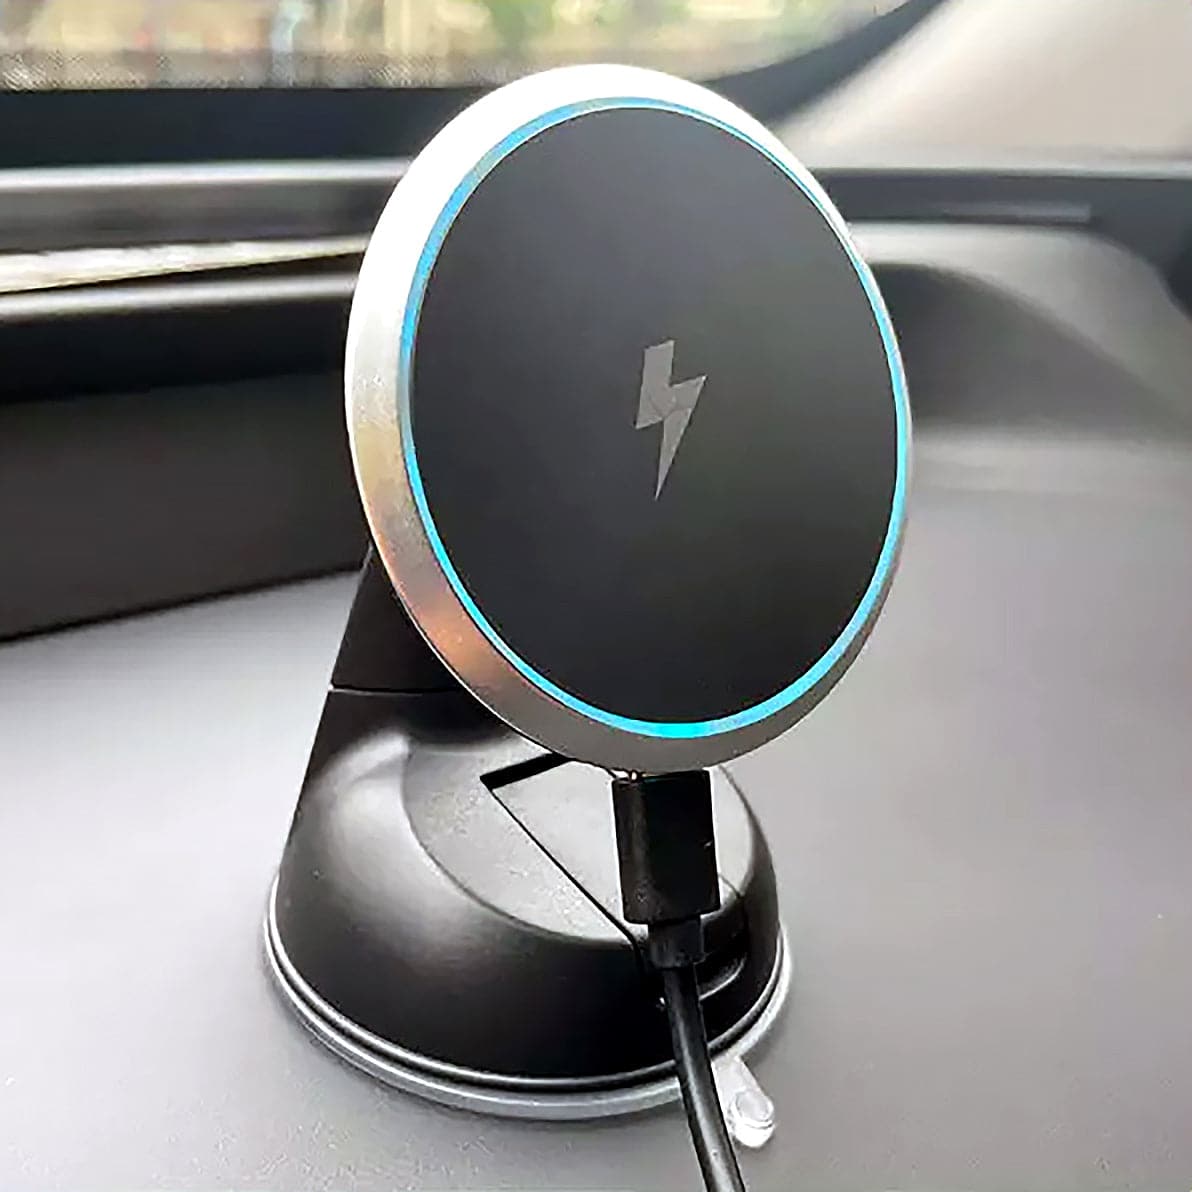 MAGNETIC WIRELESS PHONE CHARGER CRADLE KIT